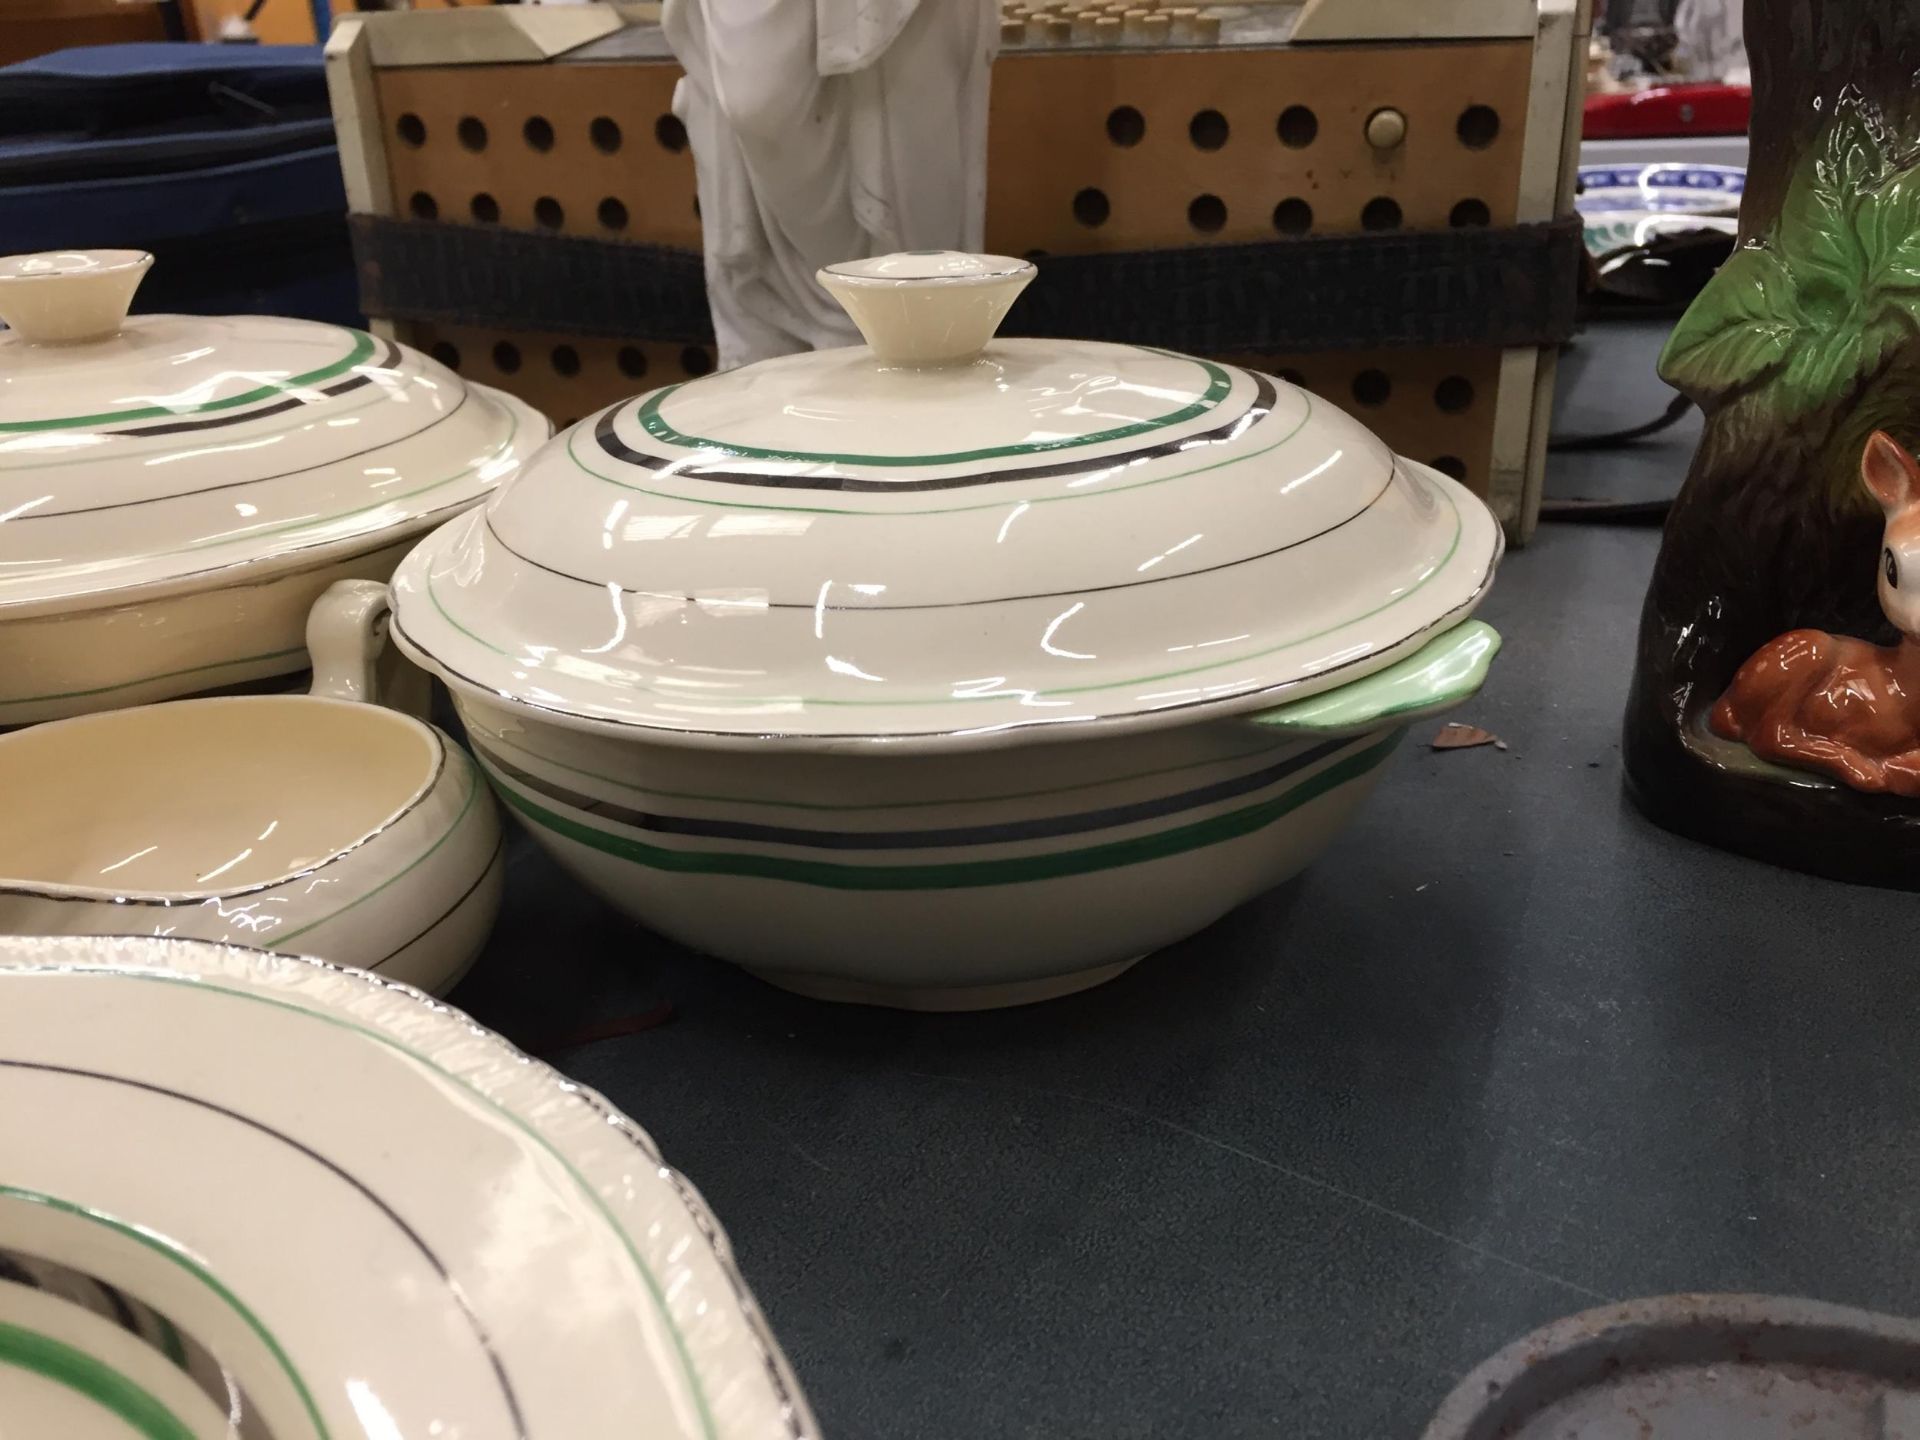 AN ART DECO ALFRED MEAKIN PART DINNER SERVICE AND PARIAN STYLE FIGURE - Image 3 of 5